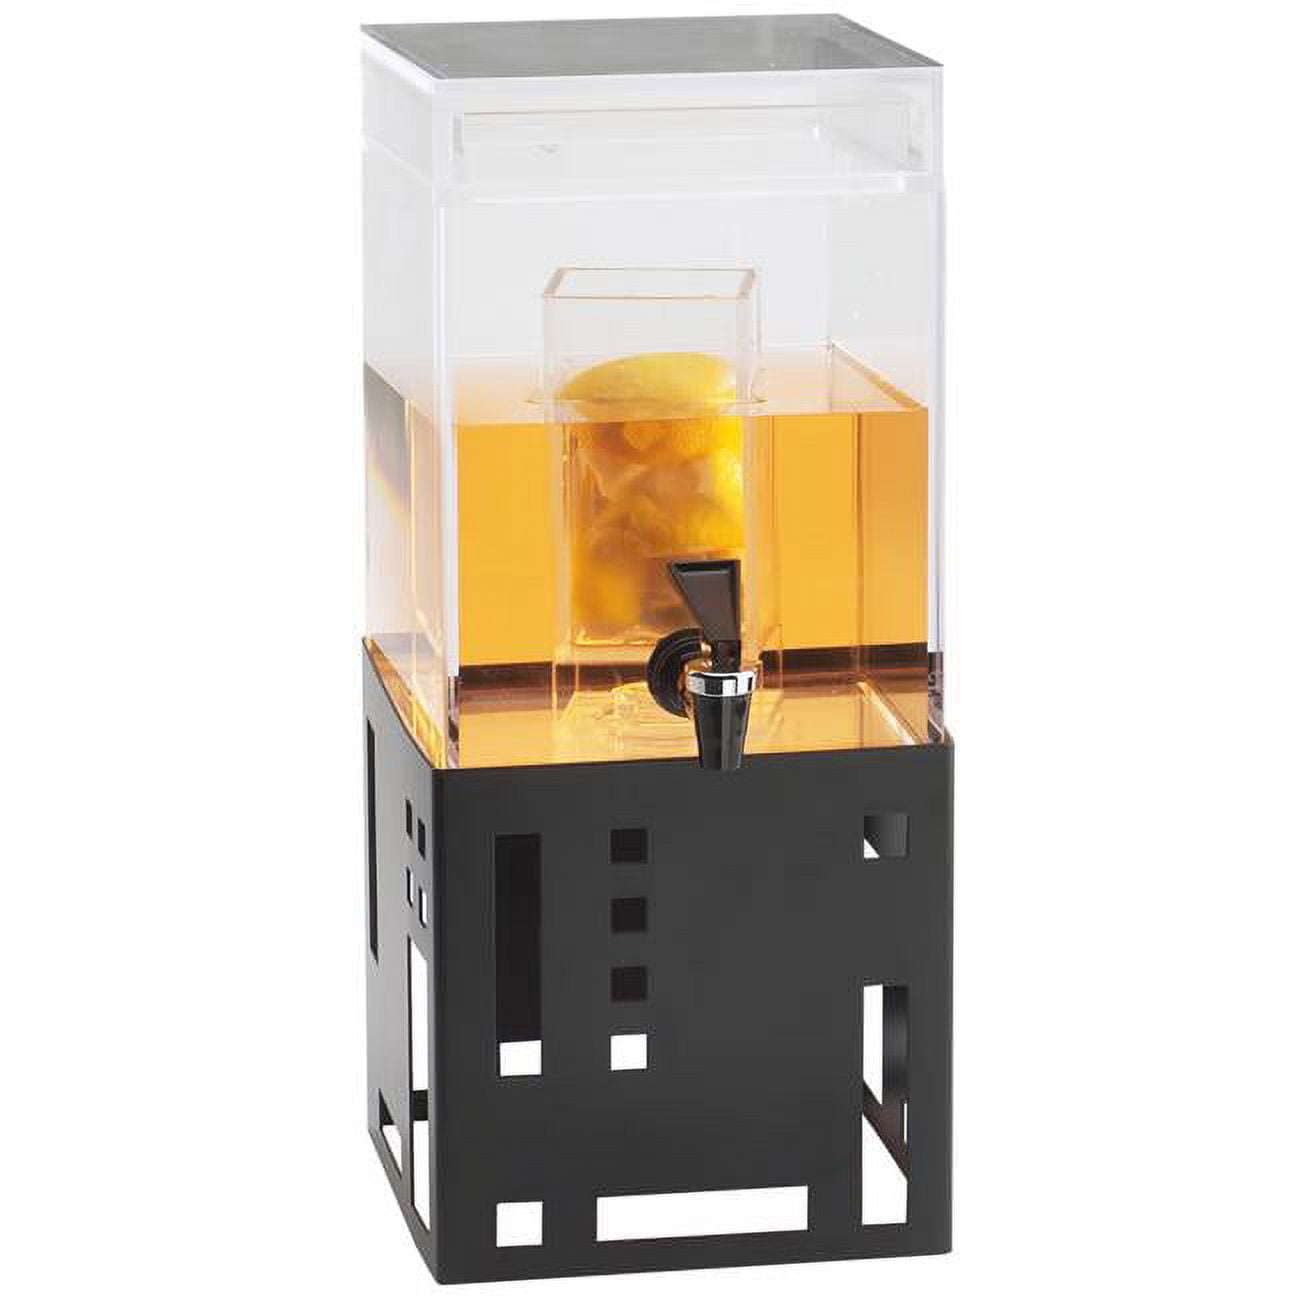 1602-1inf-13 1.5 Gal Black Beverage Dispenser With Infusion Chamber - 7.5 X 9.5 X 17.75 In.